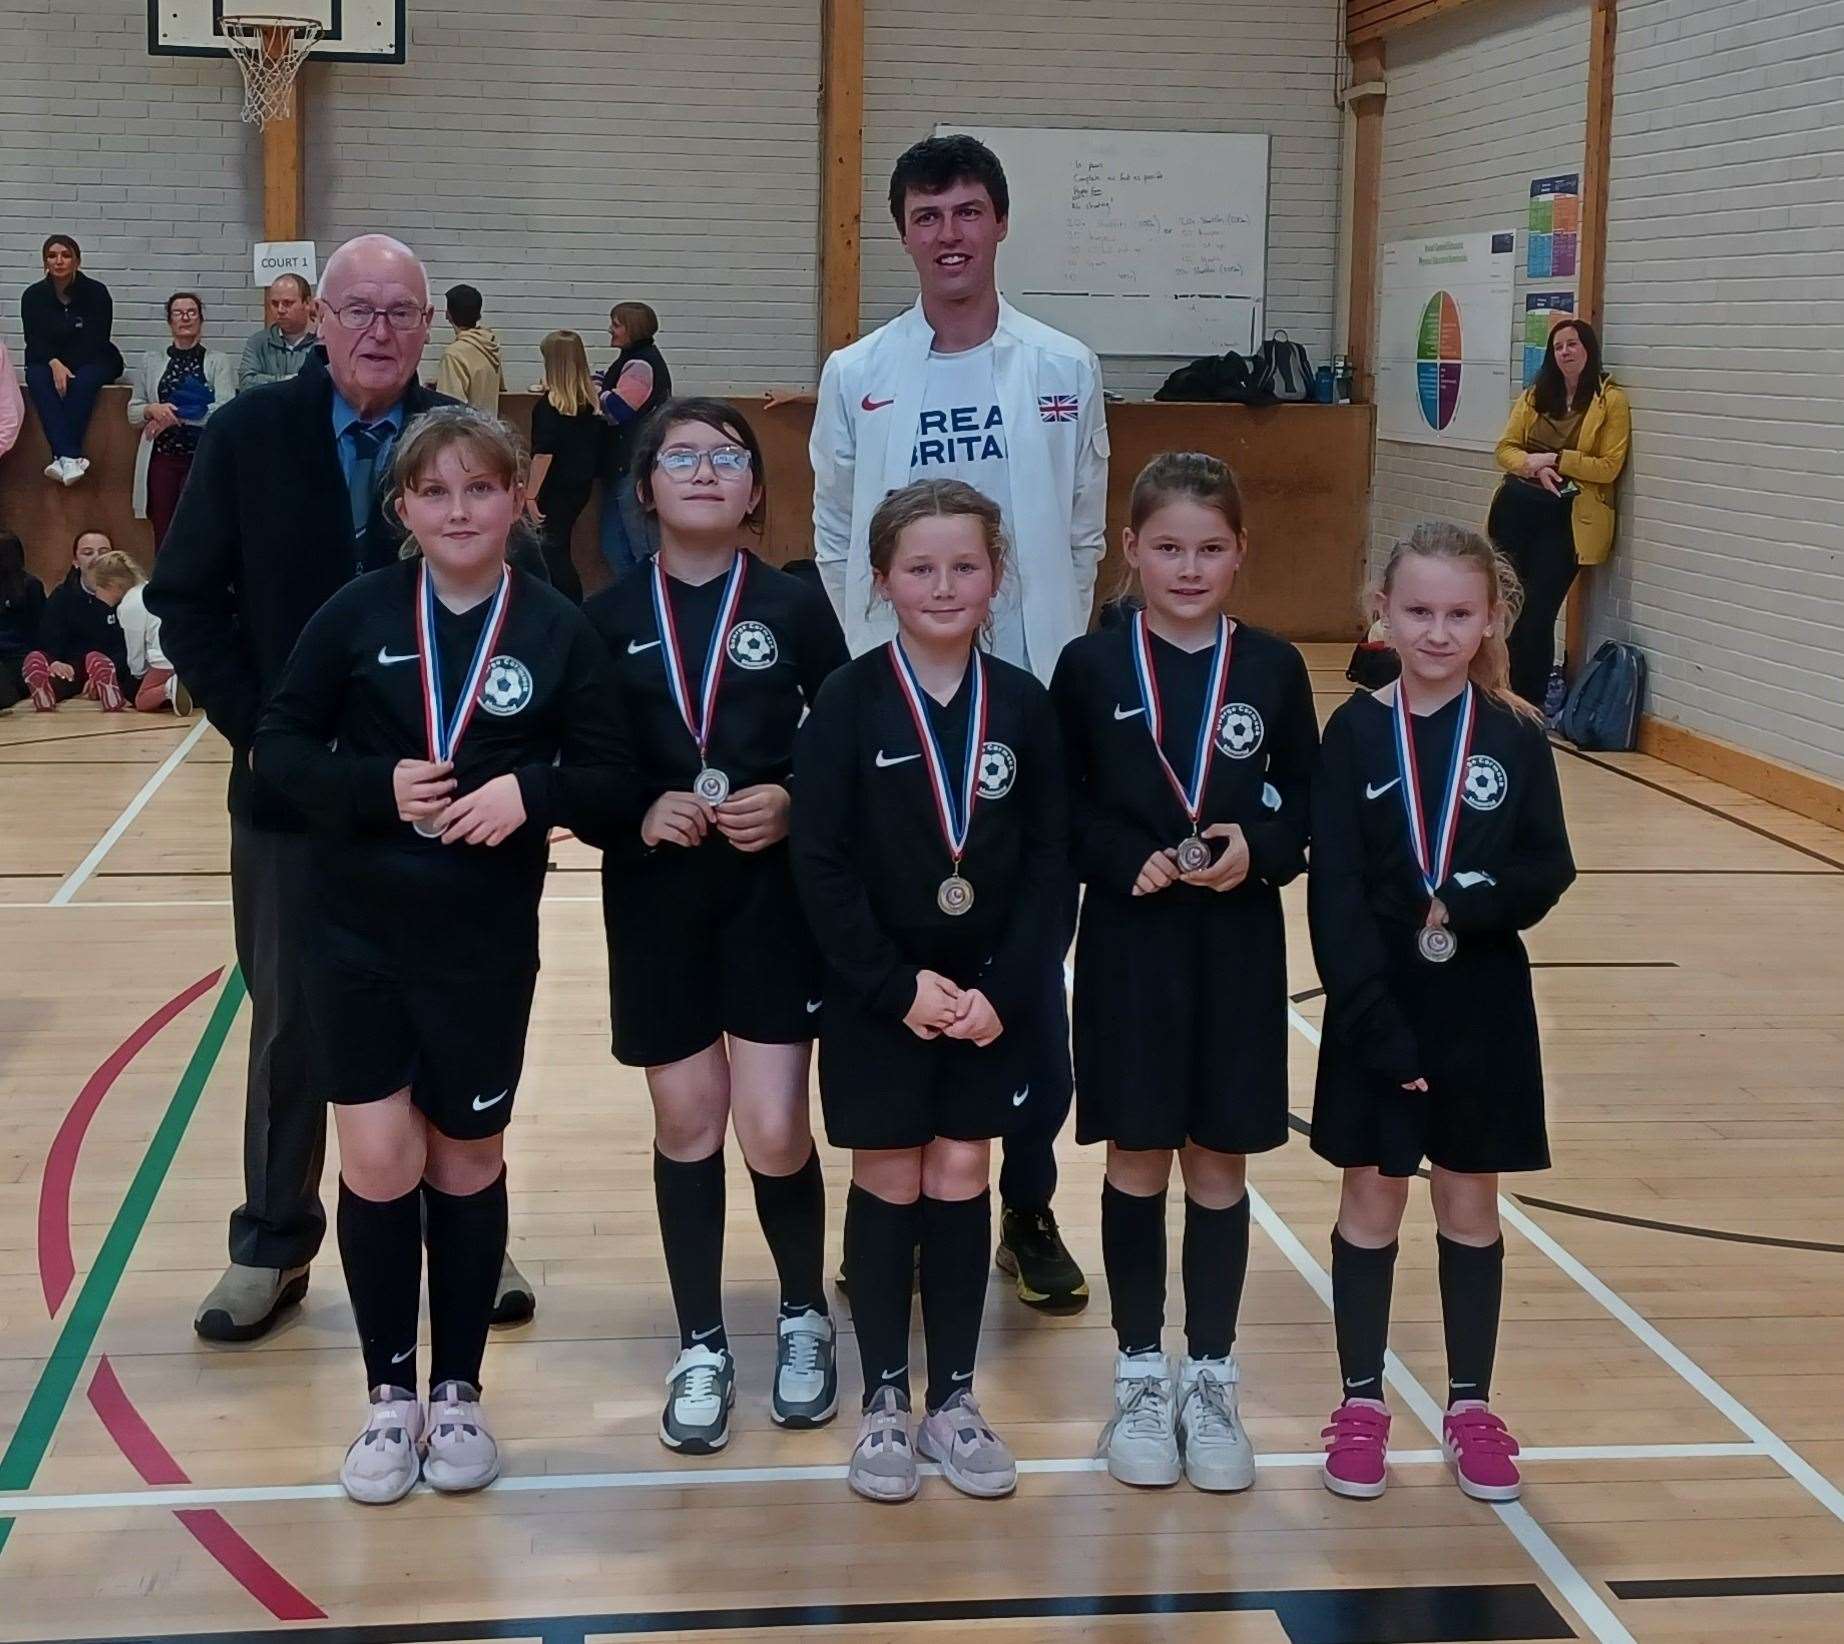 This Helmsdale team took home medals after coming second in the Small Schools girls' category.